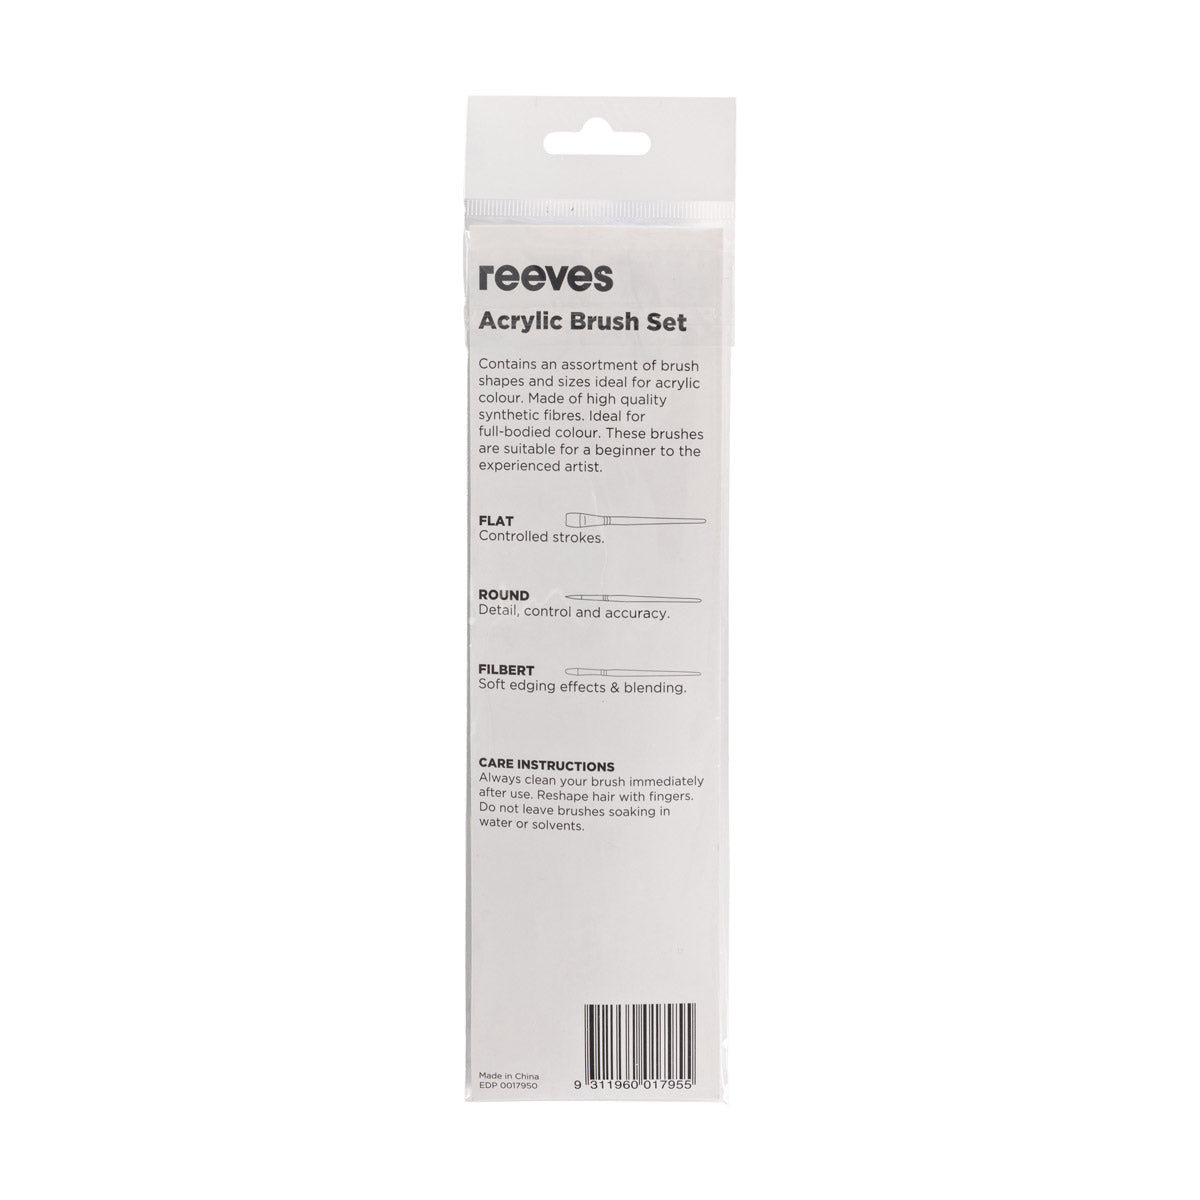 Reeves - Acrylpinsel -Set - kurzer Griff - 7x Pinselpack